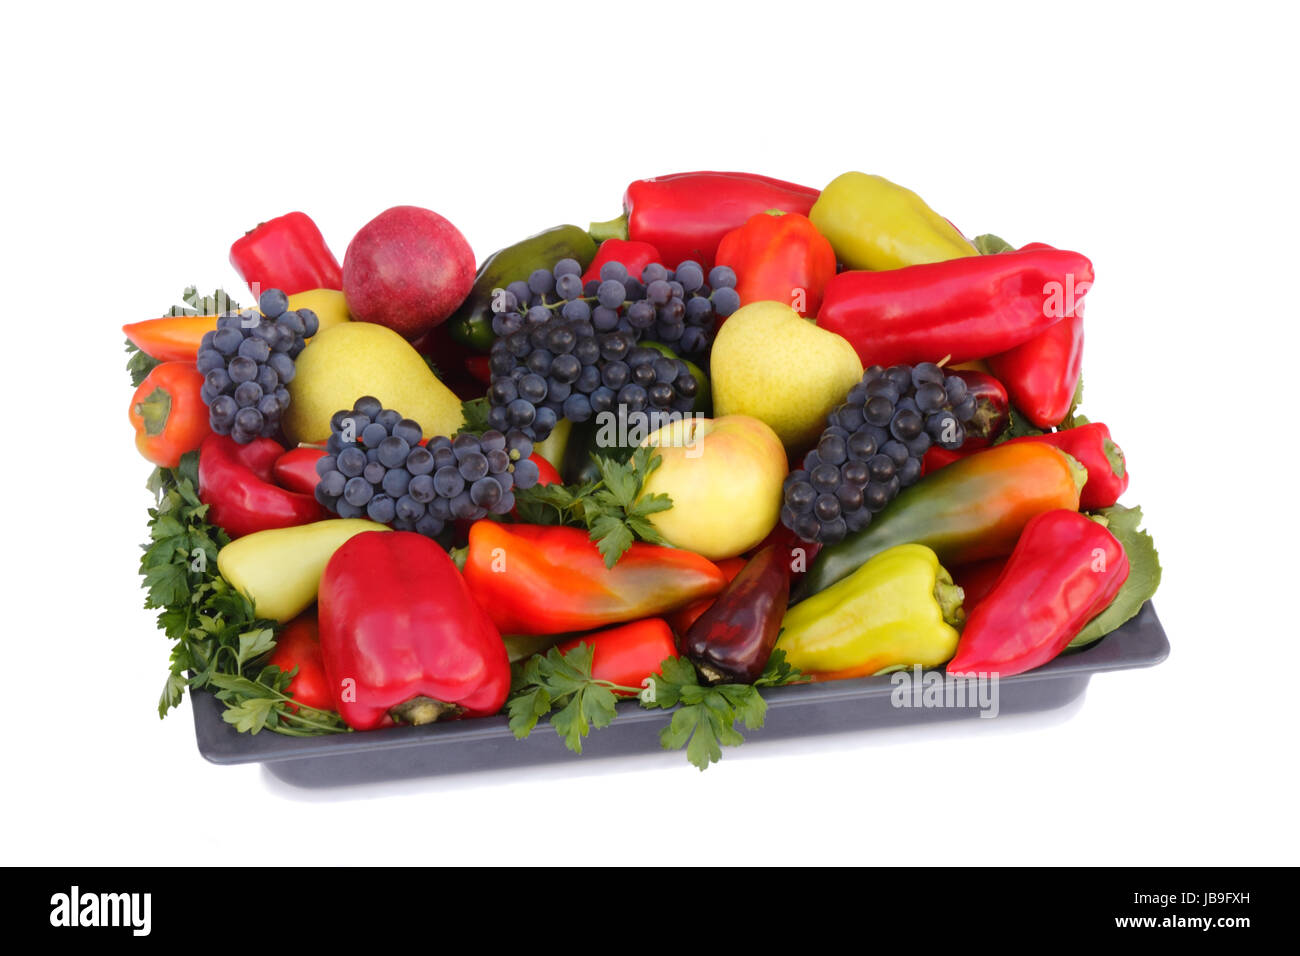 Ripe pears , apples , grapes and pepper on a platter. Presented on a white background. Stock Photo